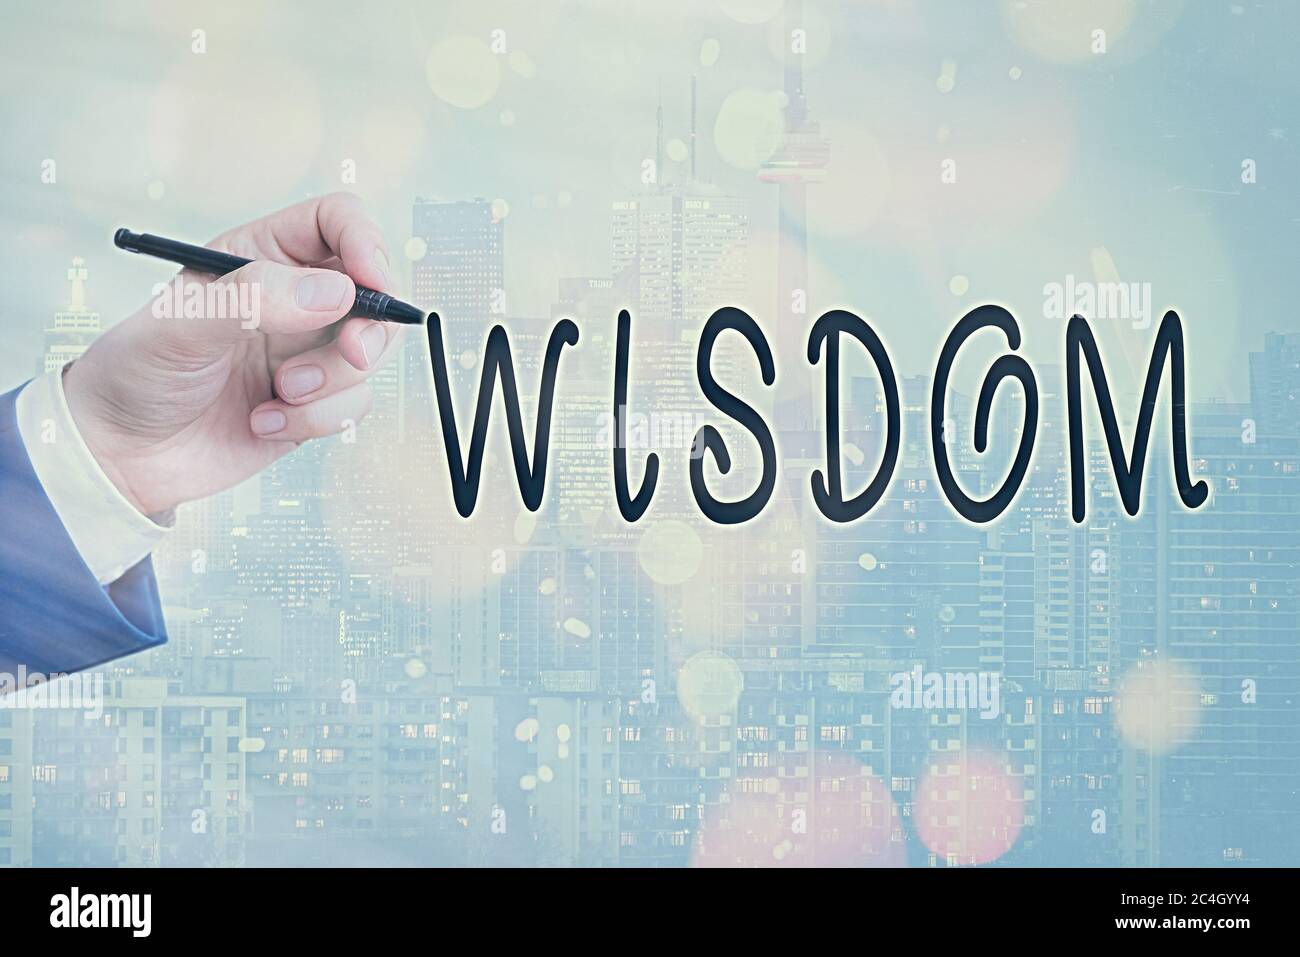 Conceptual hand writing showing Wisdom. Concept meaning body of knowledge and principles that develops within specific period Touch screen digital mar Stock Photo